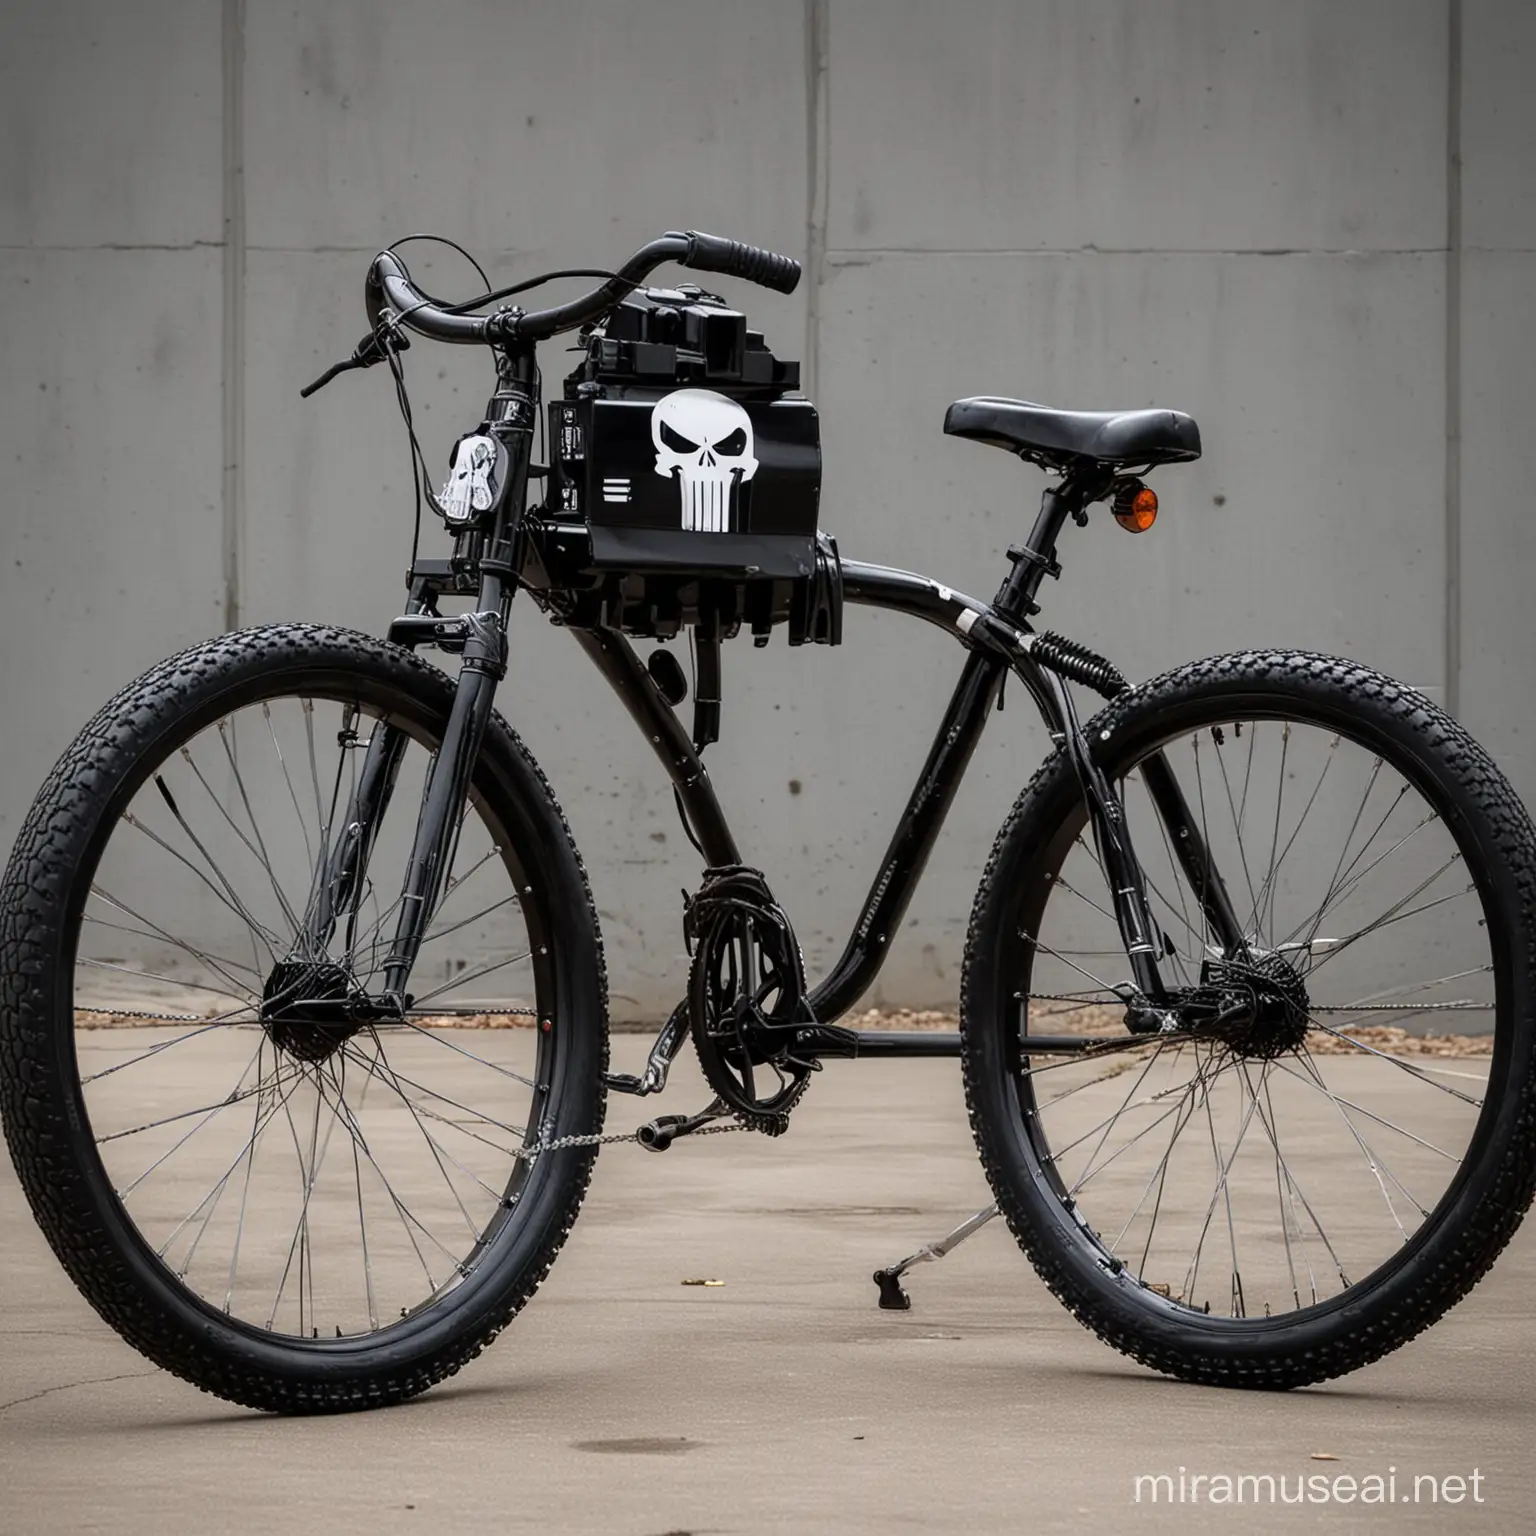 The Punisher Style bicycle